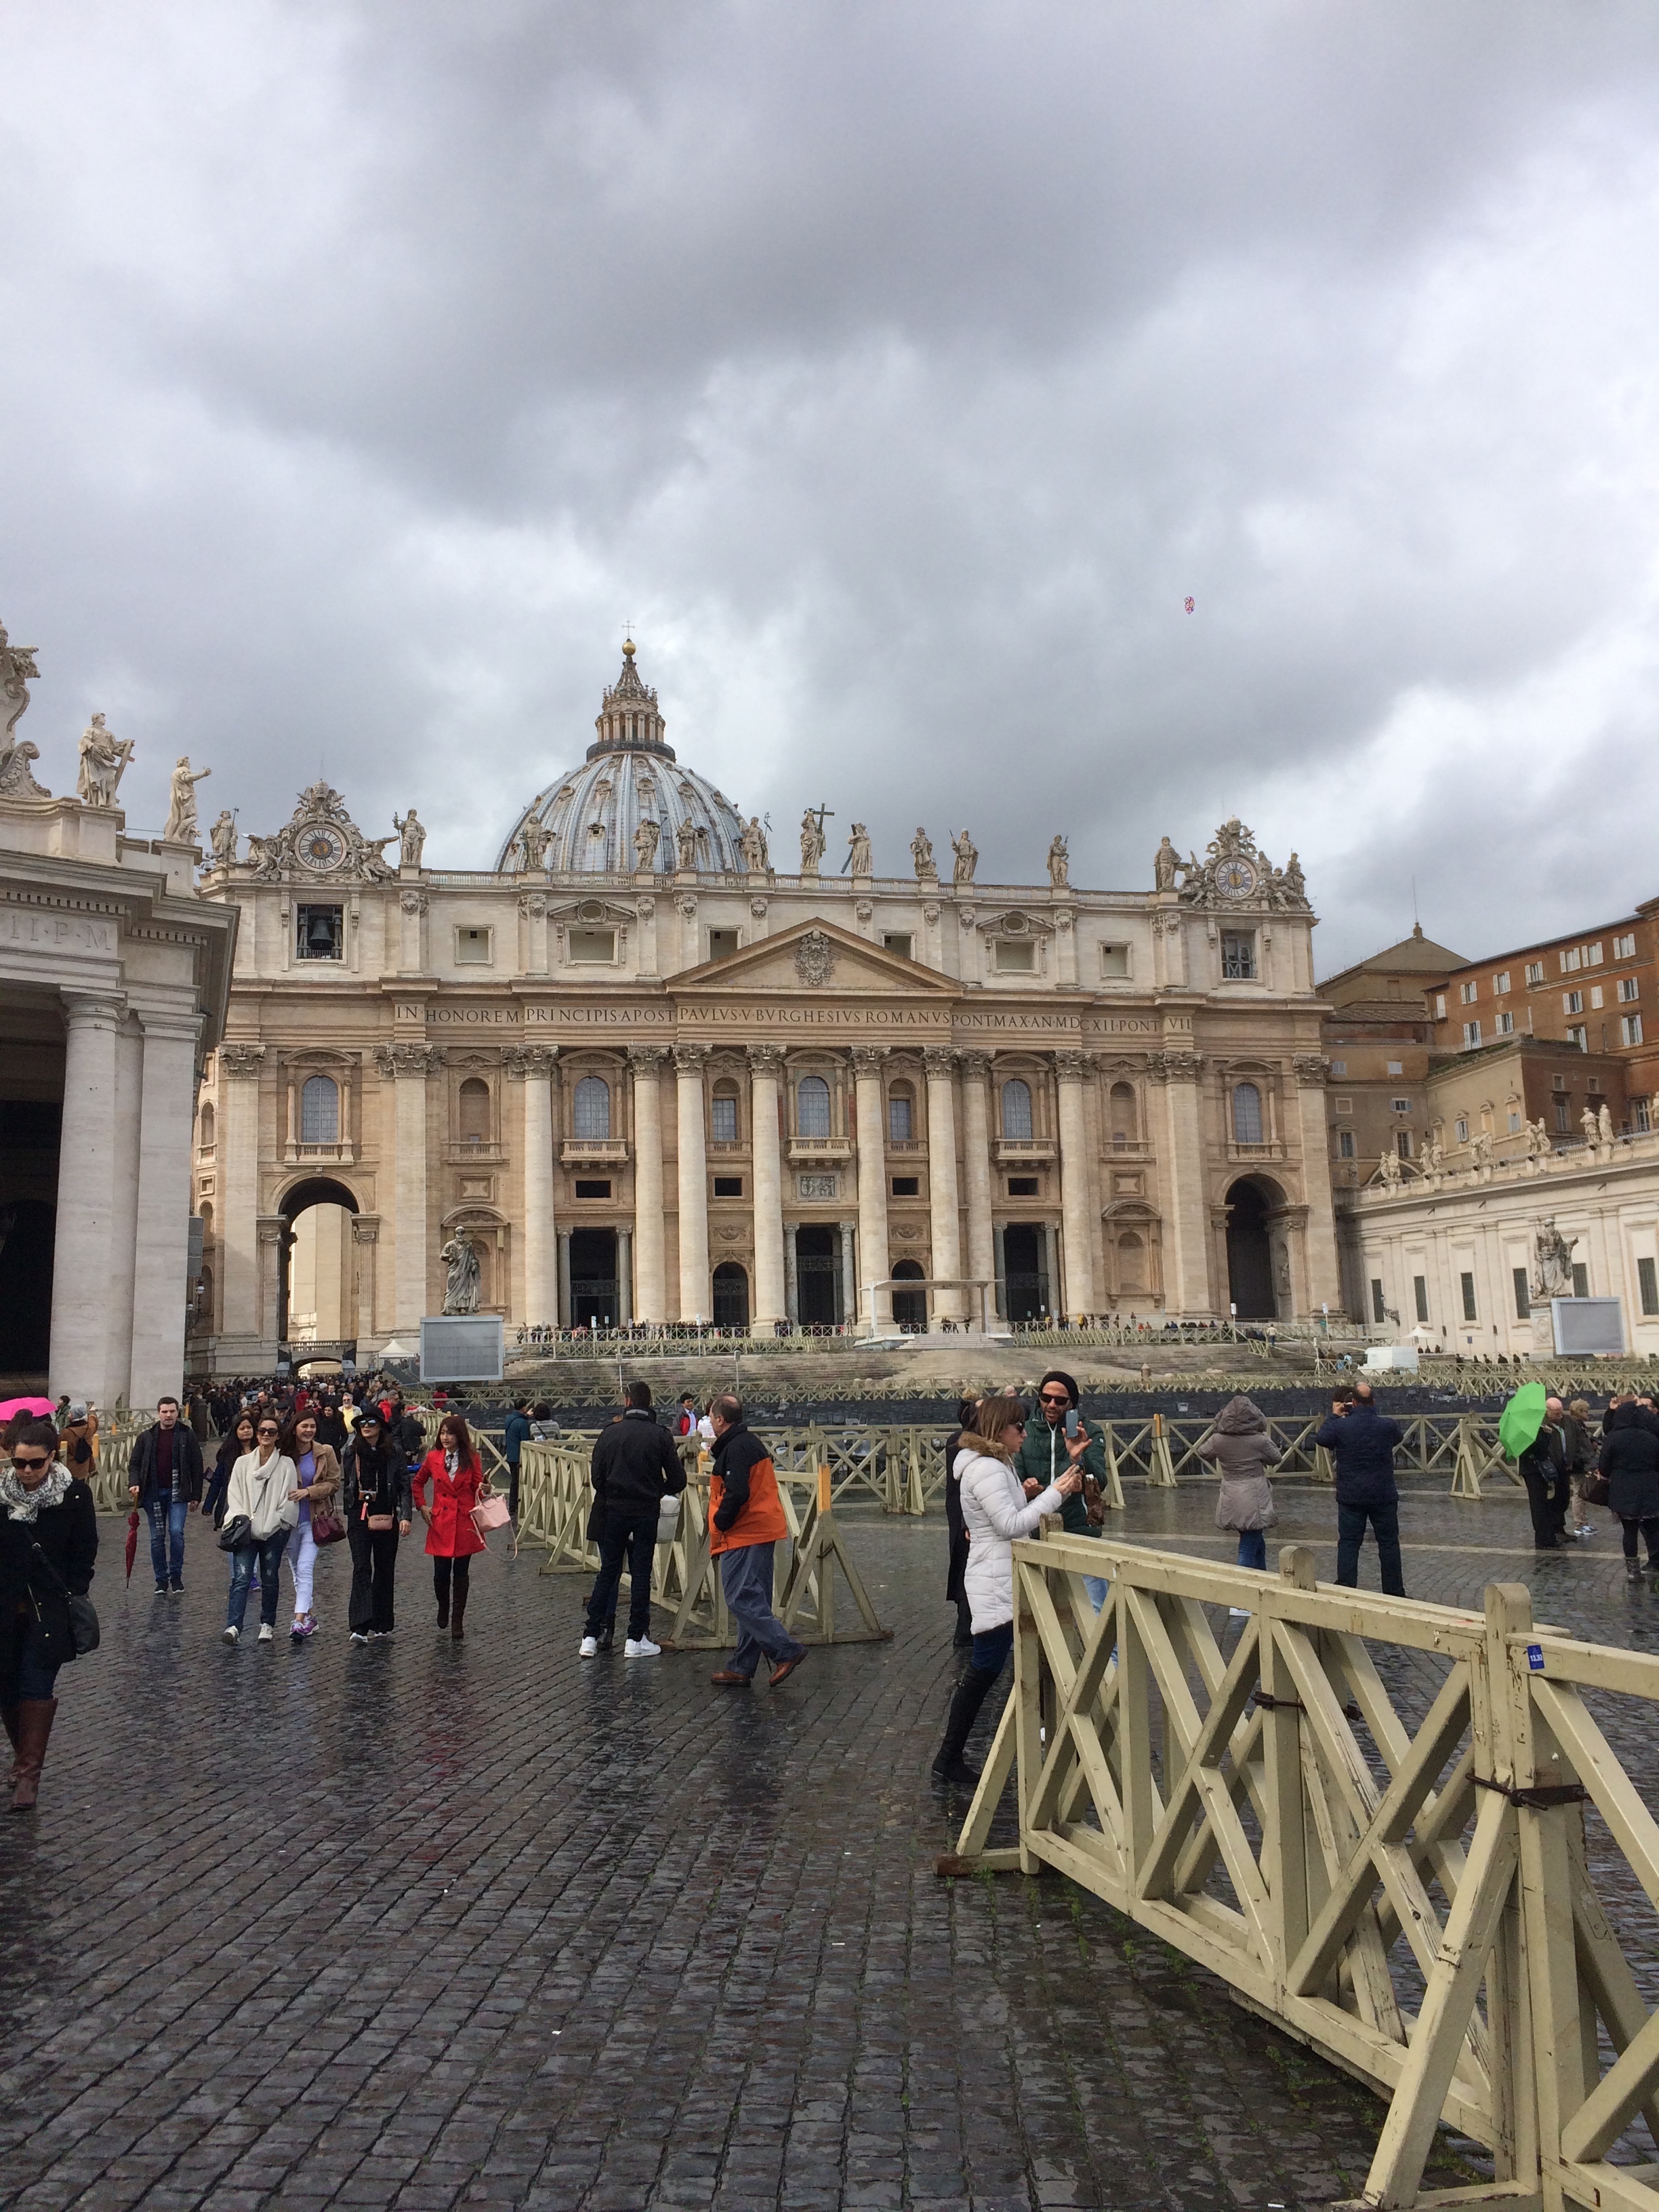 Image of the exterior of the Vatican